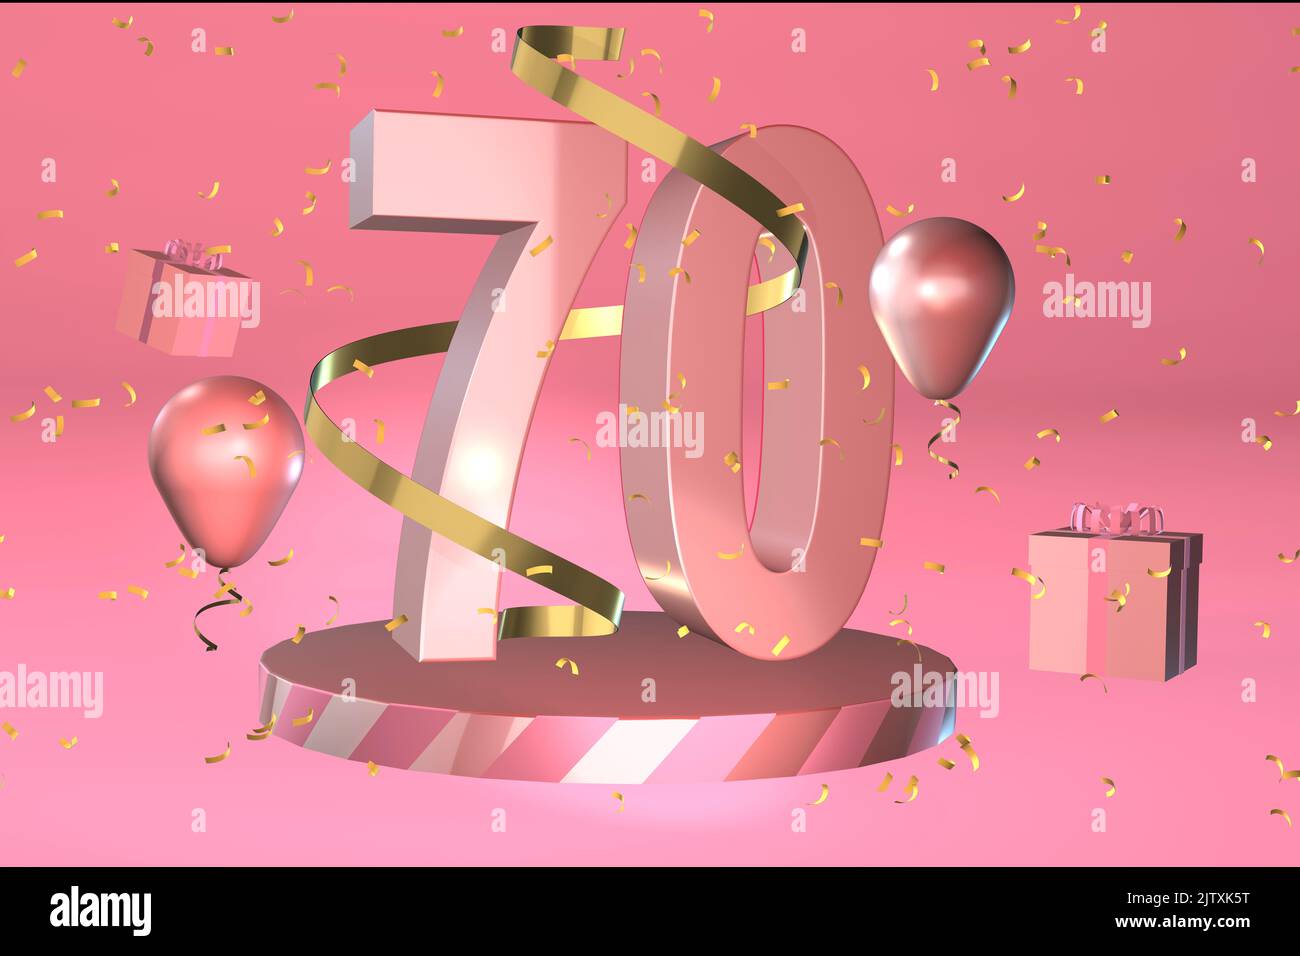 70th birthday background banner or seventy seventieth anniversary backgrounds celebration card or invitation Stock Photo